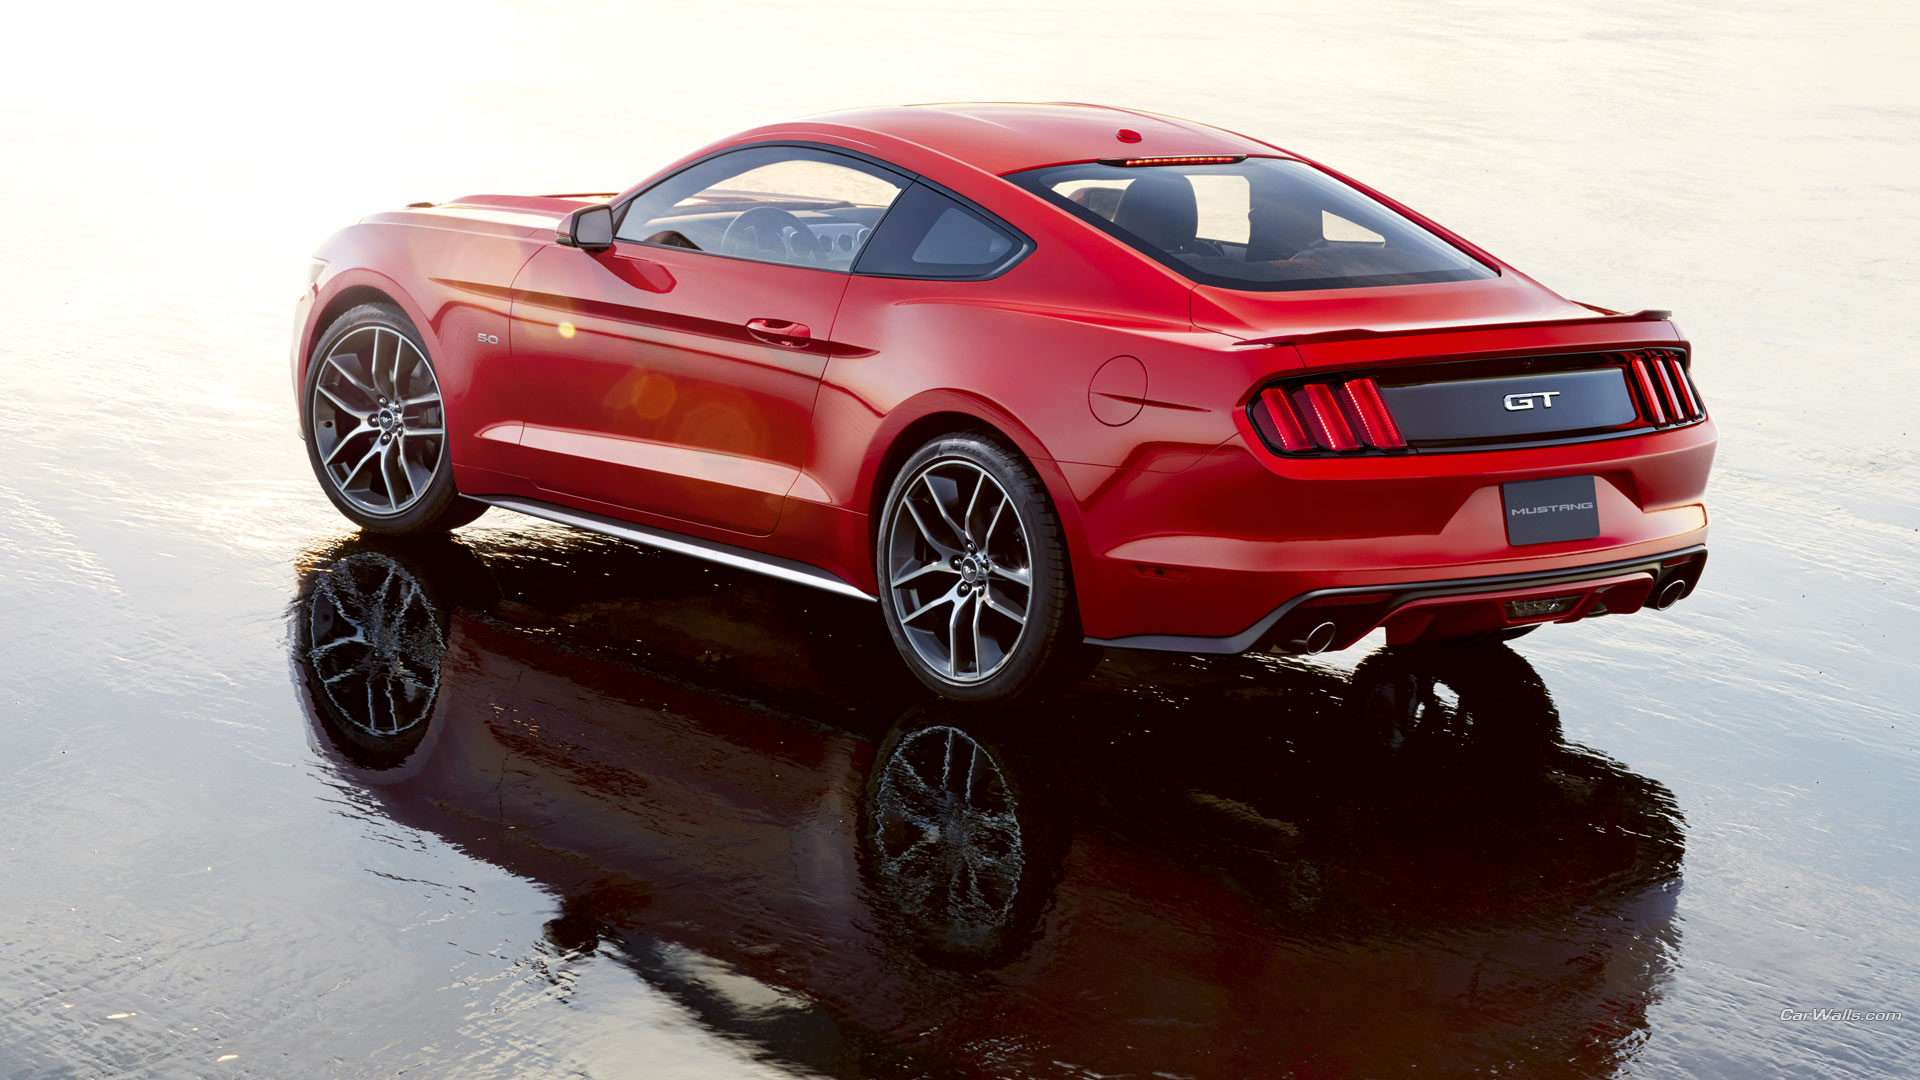 Vehicles 2015 Ford Mustang GT 1920x1080